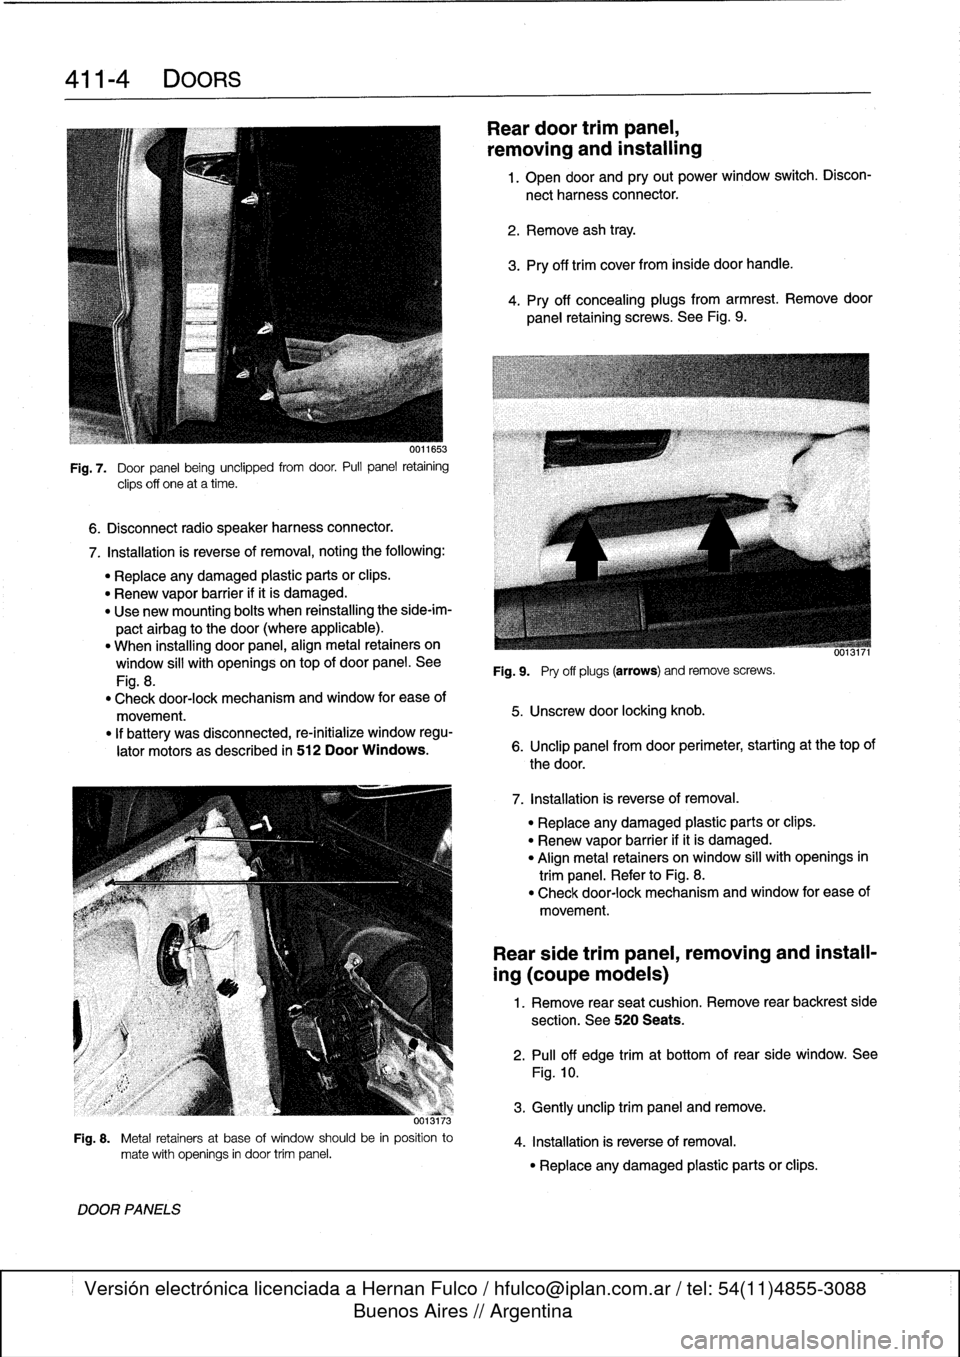 BMW 325i 1998 E36 Workshop Manual 
411-
4
DOORS

6
.
Disconnect
radio
speaker
harness
connector
.

Fig
.
7
.

	

Door
panel
being
unclipped
from
door
.
Pull
panel
retaining

clips
off
one
at
a
time
.

7
.
Installation
is
reverse
of
re